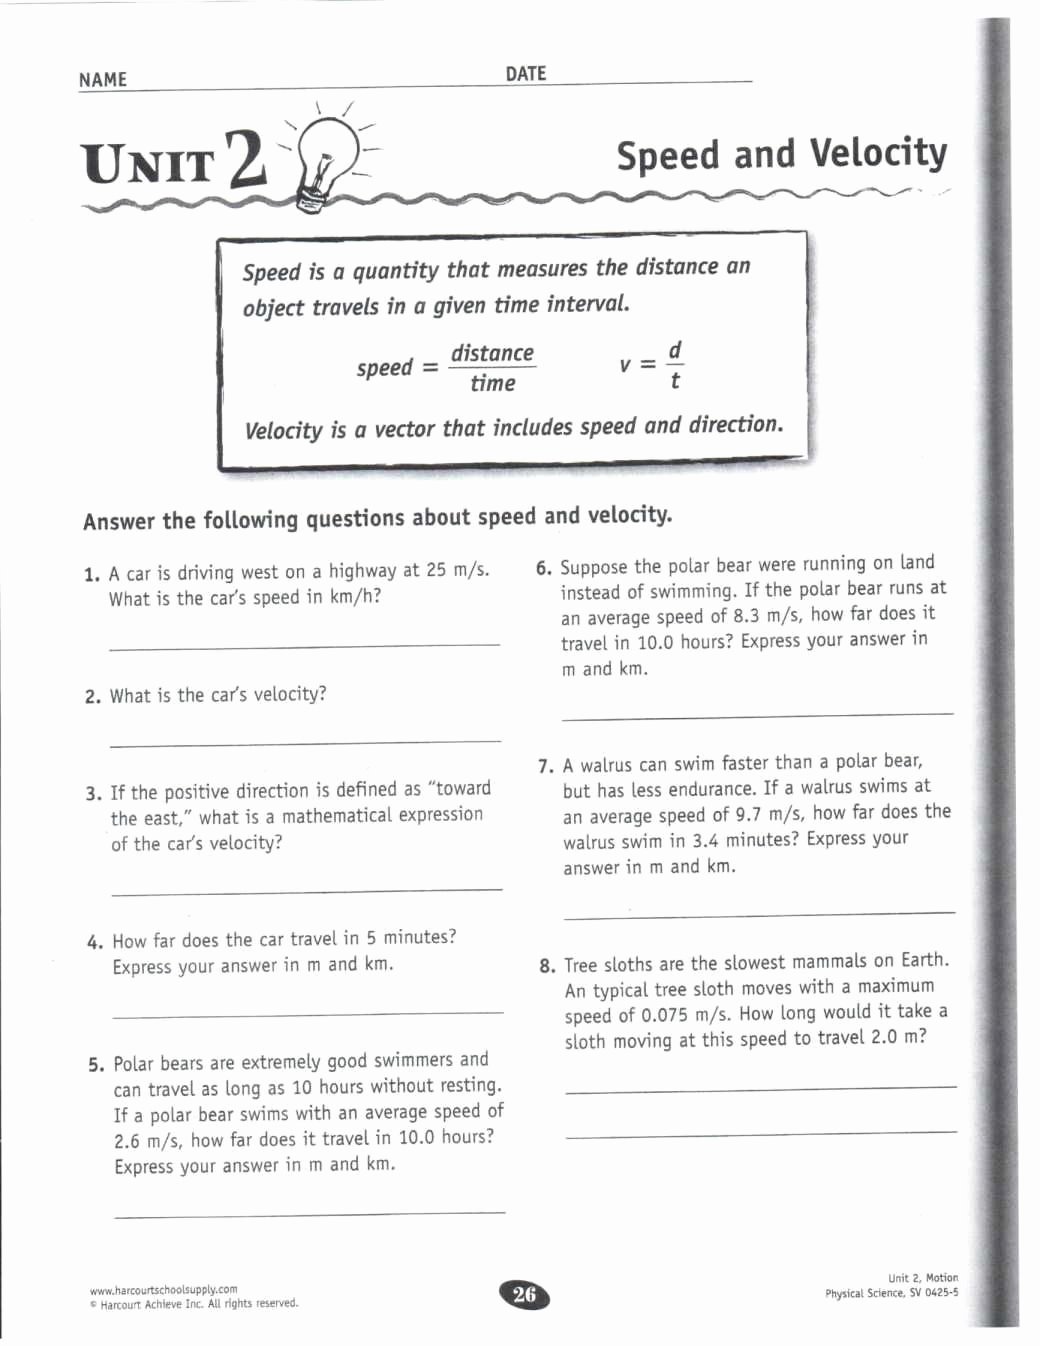 Velocity and Acceleration Calculation Worksheet Lovely Velocity and Acceleration Calculation Worksheet Answer Key